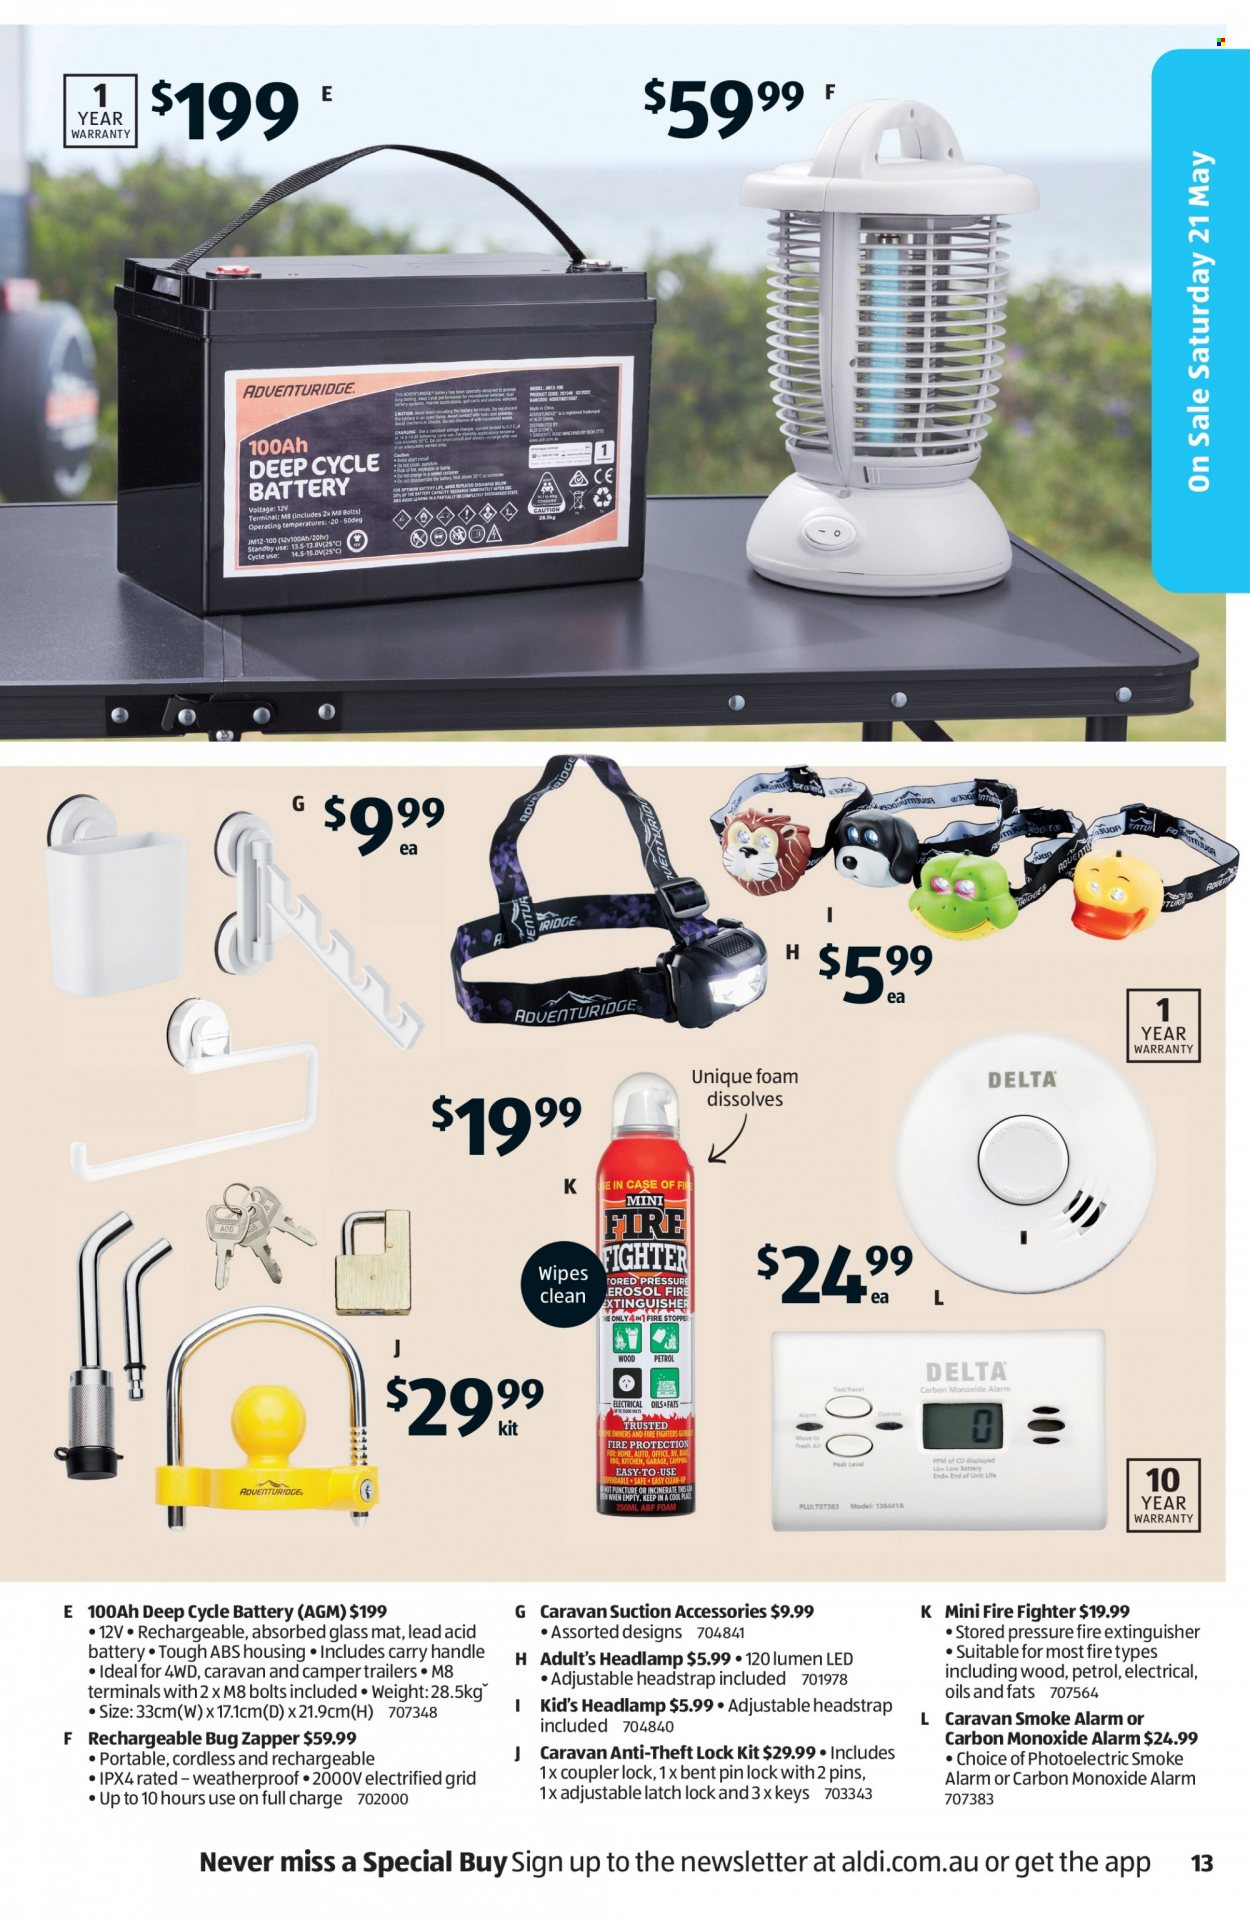 ALDI Catalogue - 19 May 2022 - 25 May 2022 - Sales products - wipes, extinguisher, pin, alarm, smoke alarm, carbon monoxide alarm, headlamp, deep cycle battery. Page 13.